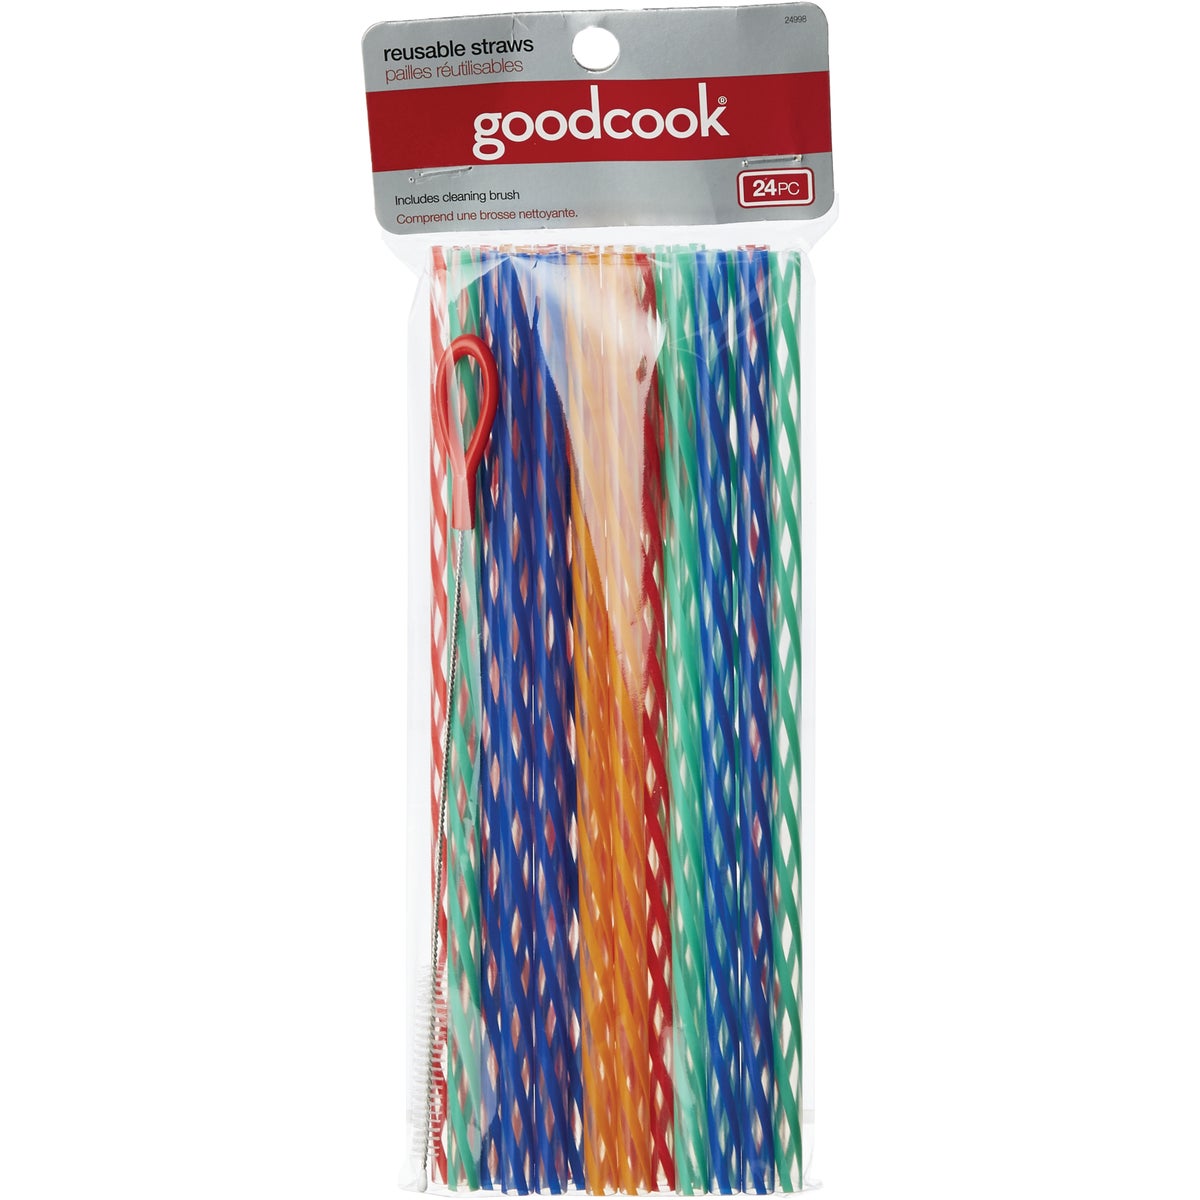 Item 618289, Eco-friendly reusable straws are strong durable plastic that can be re-used